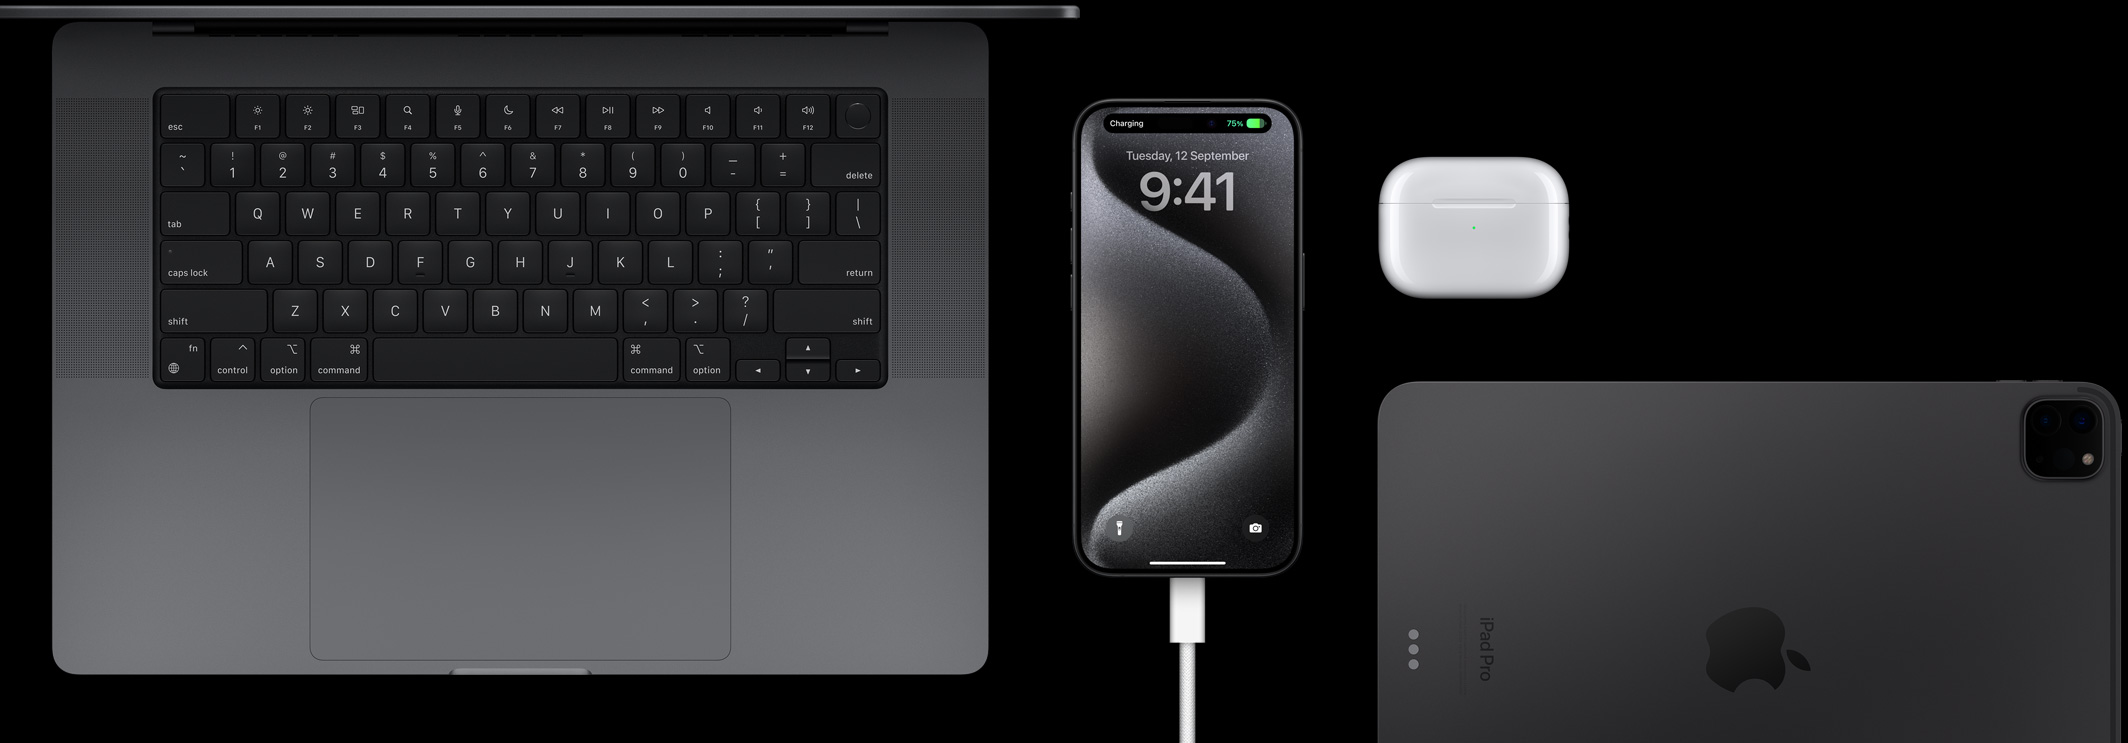 iPhone 15 Pro with a USB-C cord plugged into it surrounded by a Macbook Pro, an AirPods Pro, and an iPad